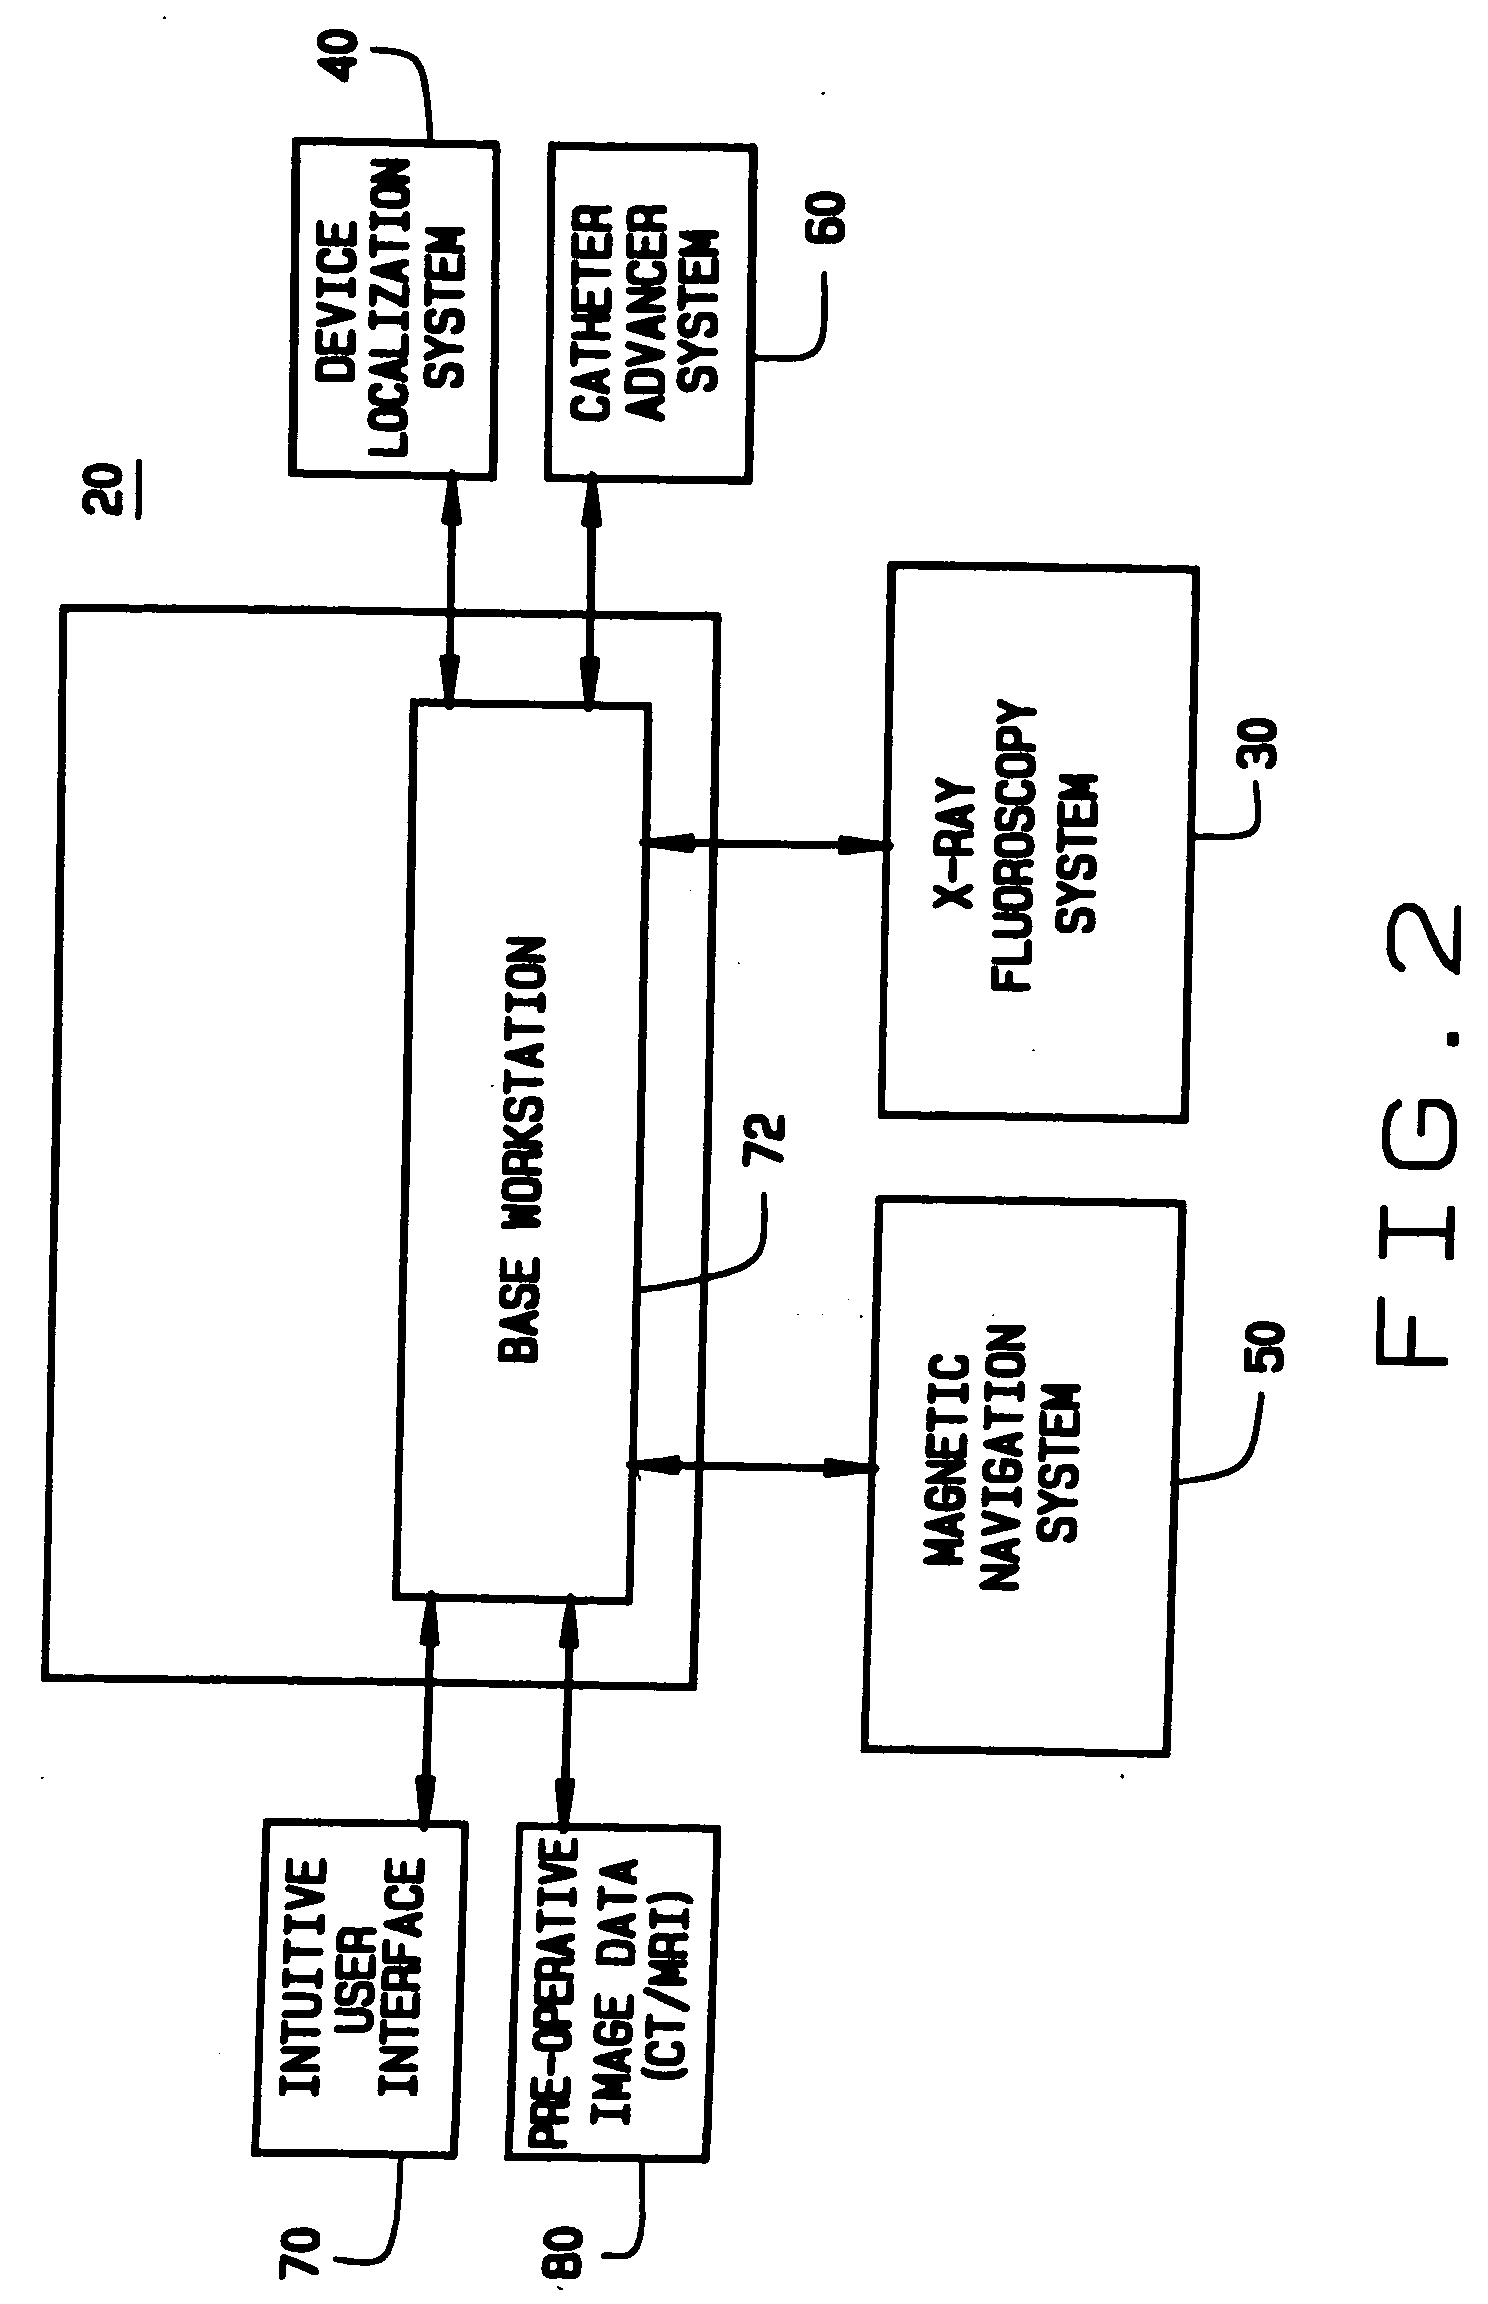 Systems and methods for interventional medicine